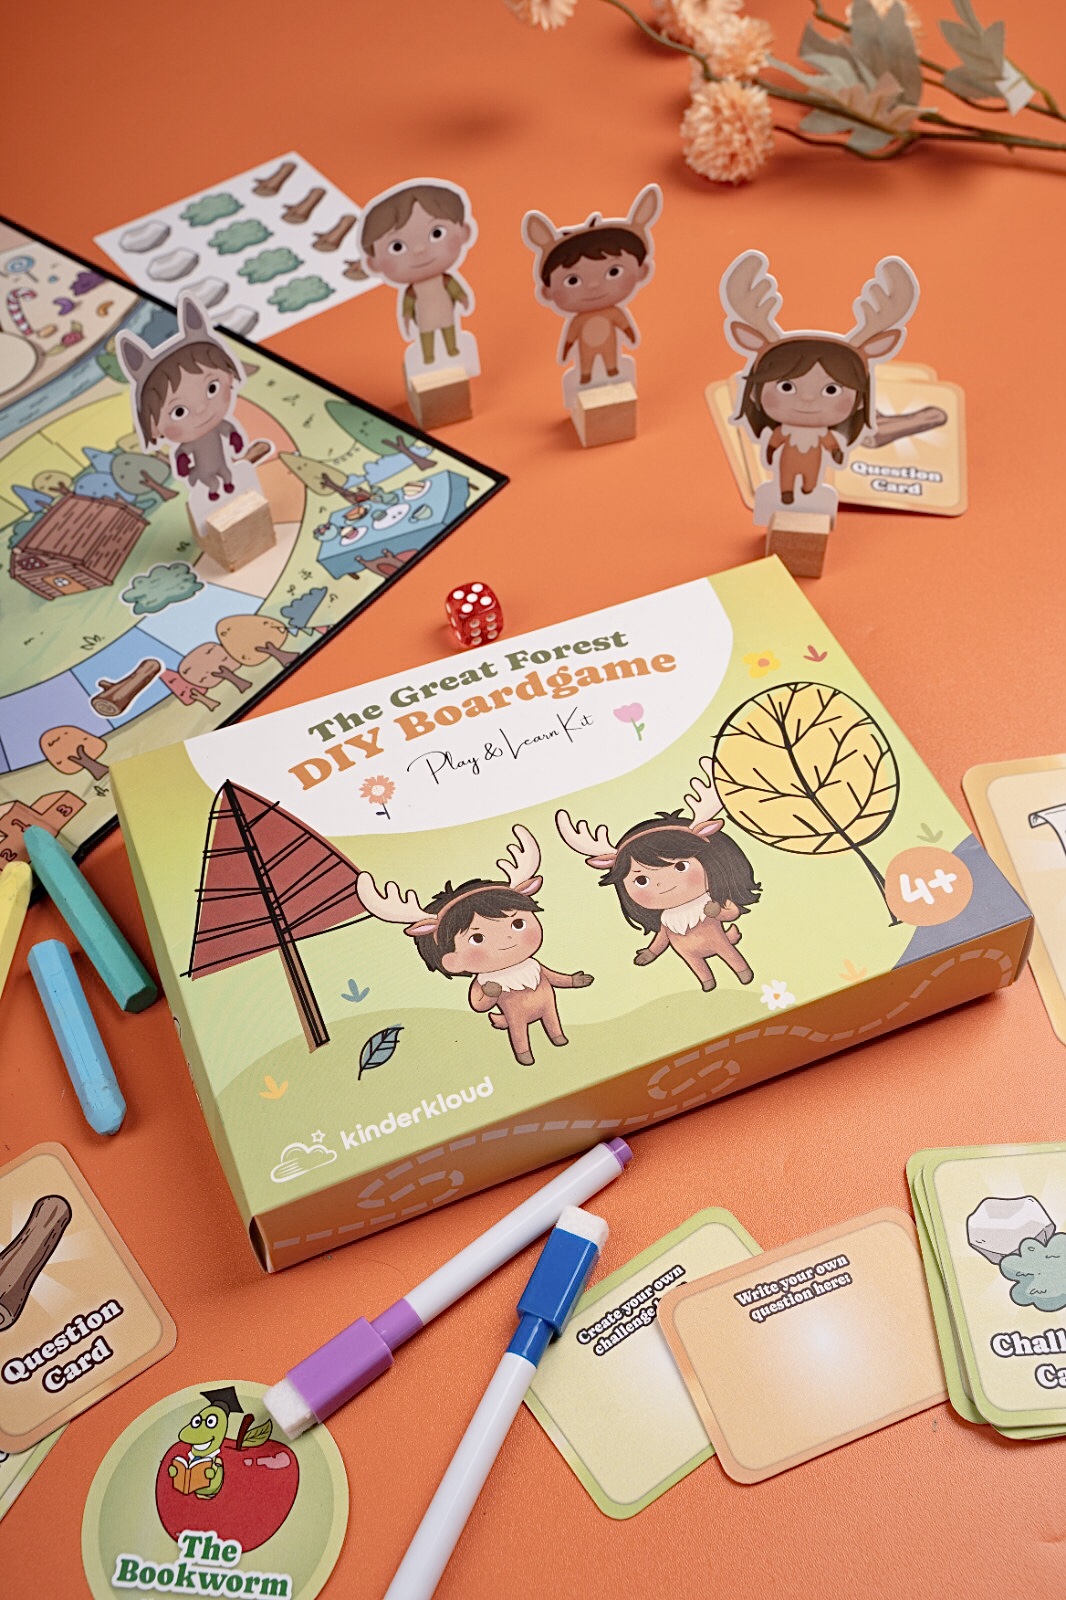 photo of the great forest diy board game activity kit being a good sport kinderkloud